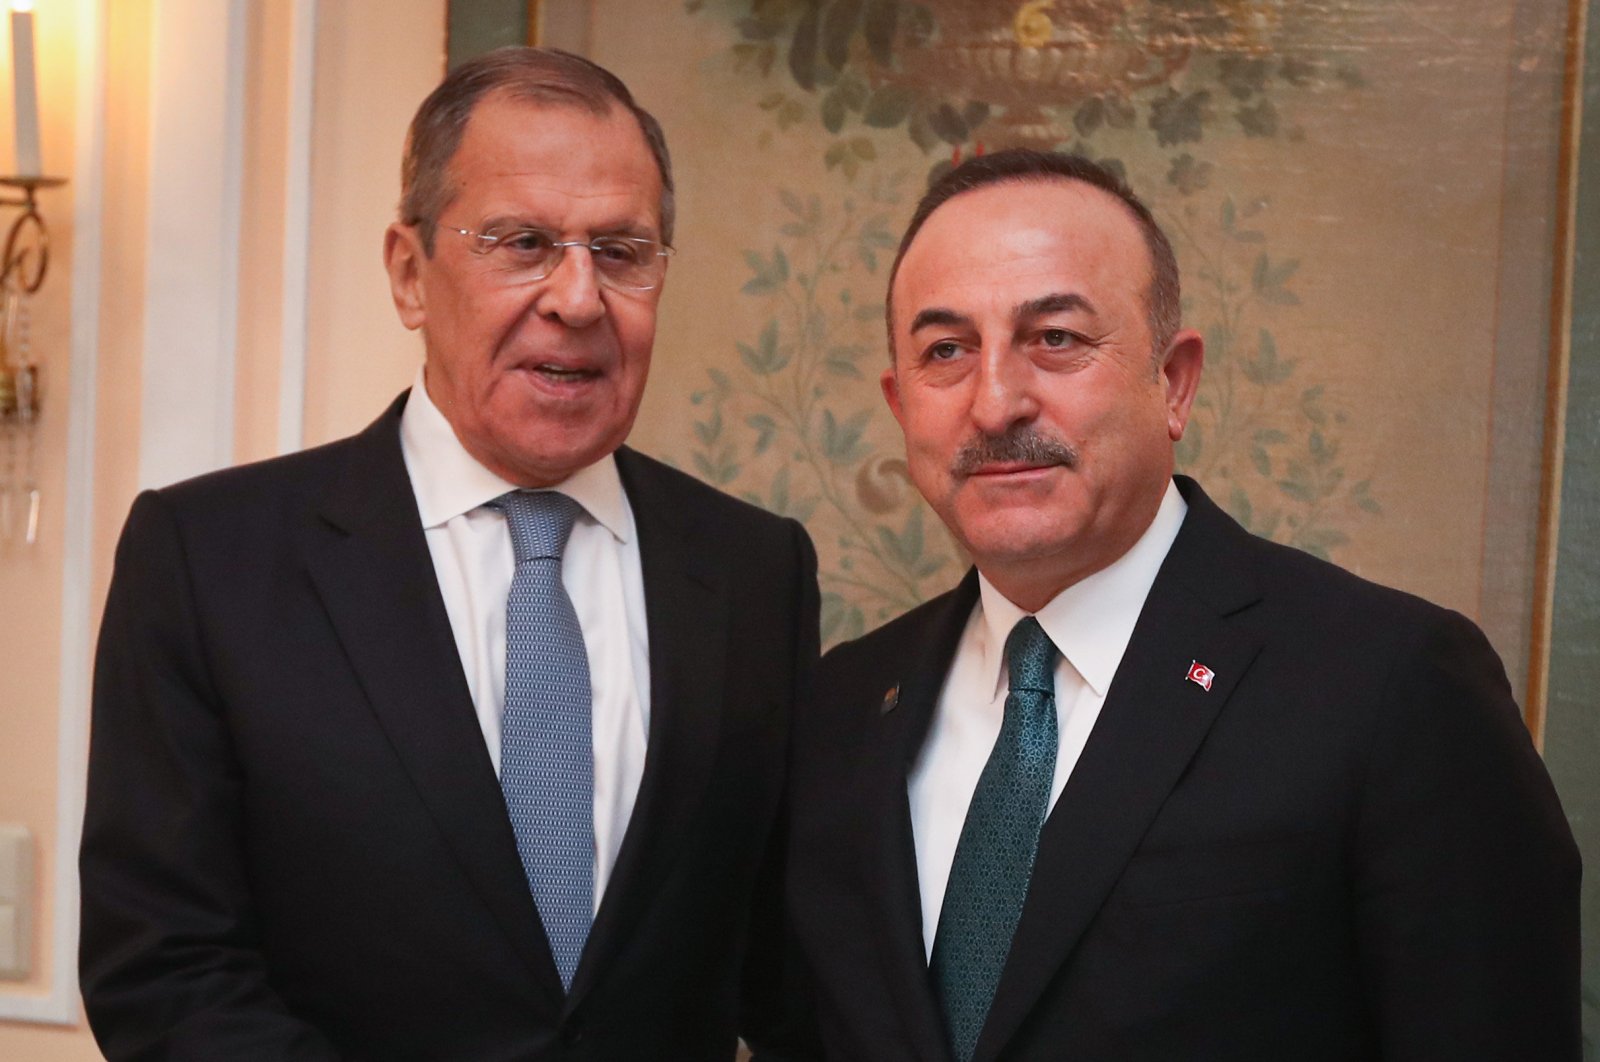 Foreign Minister Mevlüt Çavuşoğlu and his Russian counterpart Sergey Lavrov during a conference in Munich, February 17, 2020. (AA Photo)